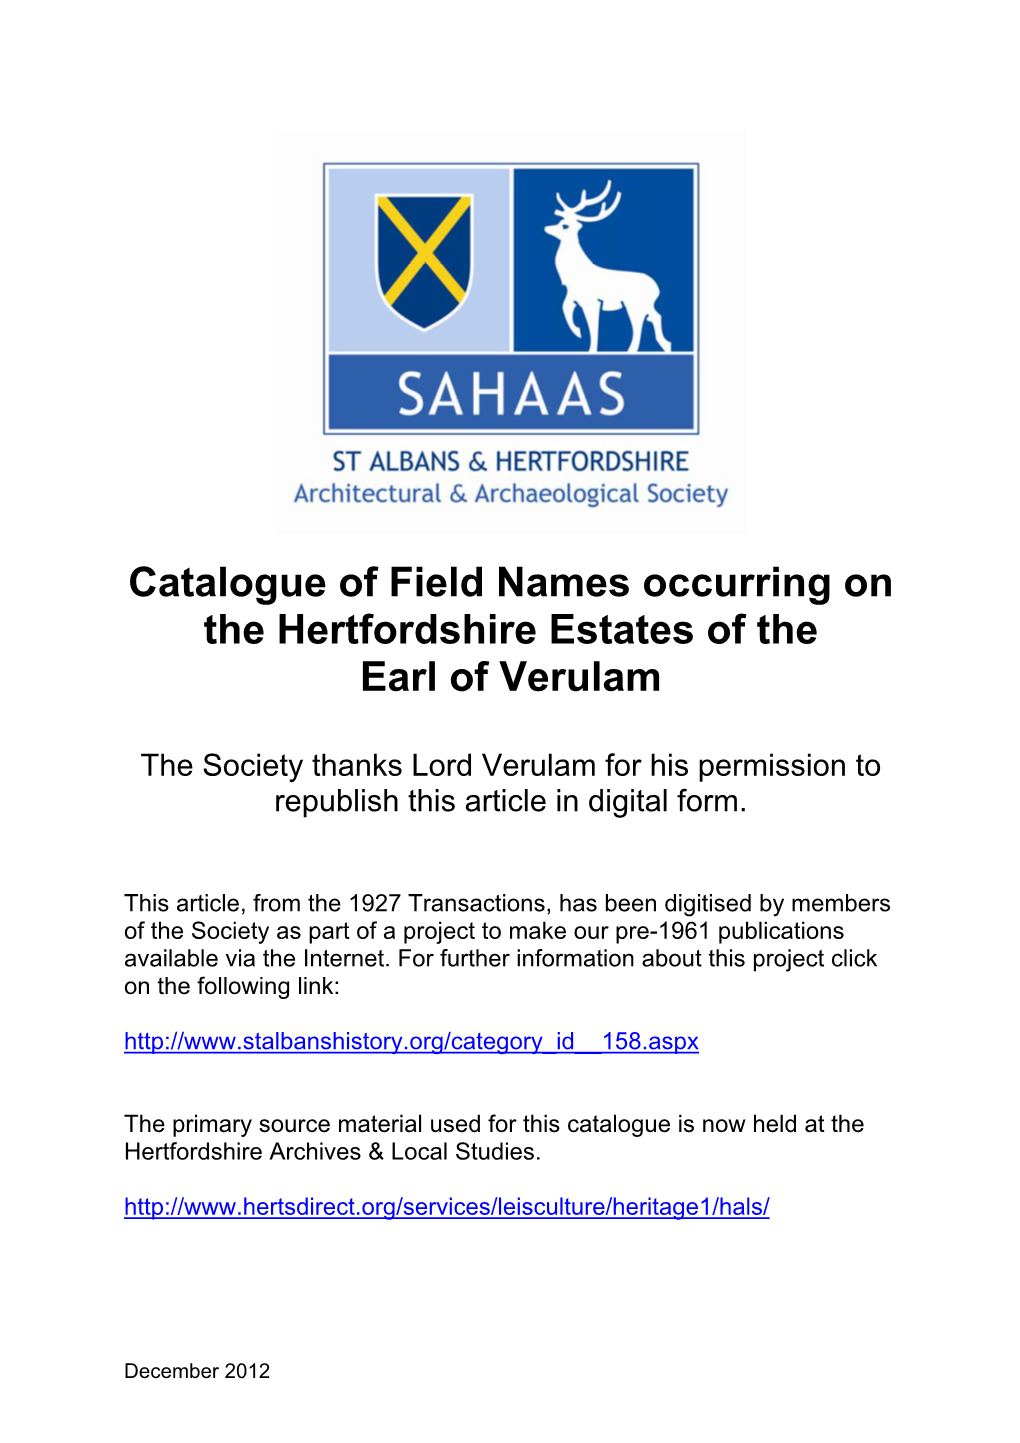 Catalogue of Field Names Occurring on the Hertfordshire Estates of the Earl of Verulam